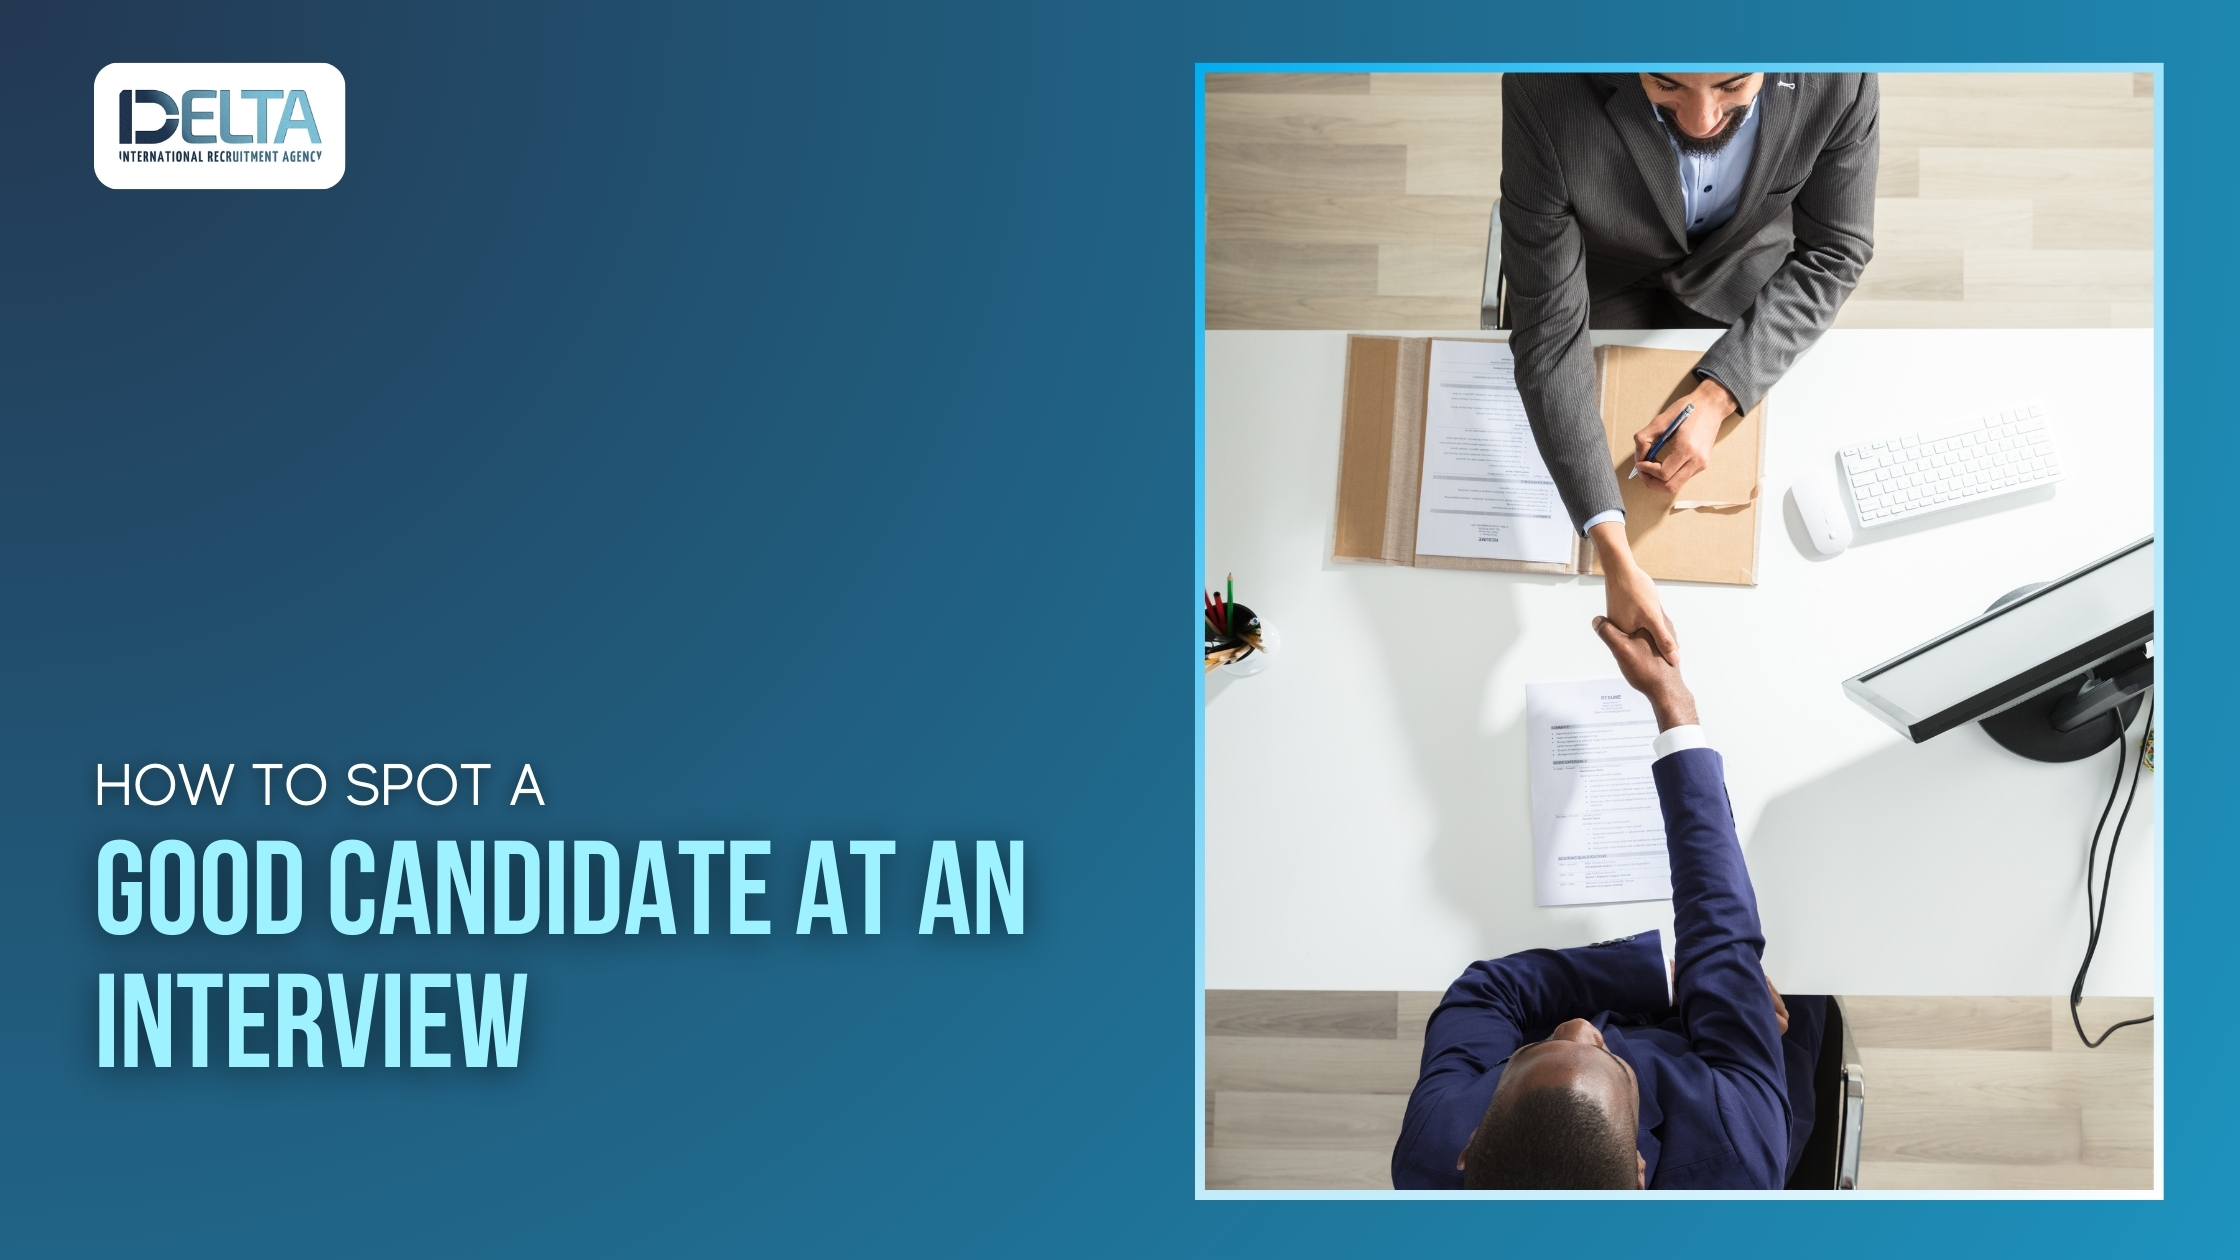 How to Spot a Good Candidate at an Interview